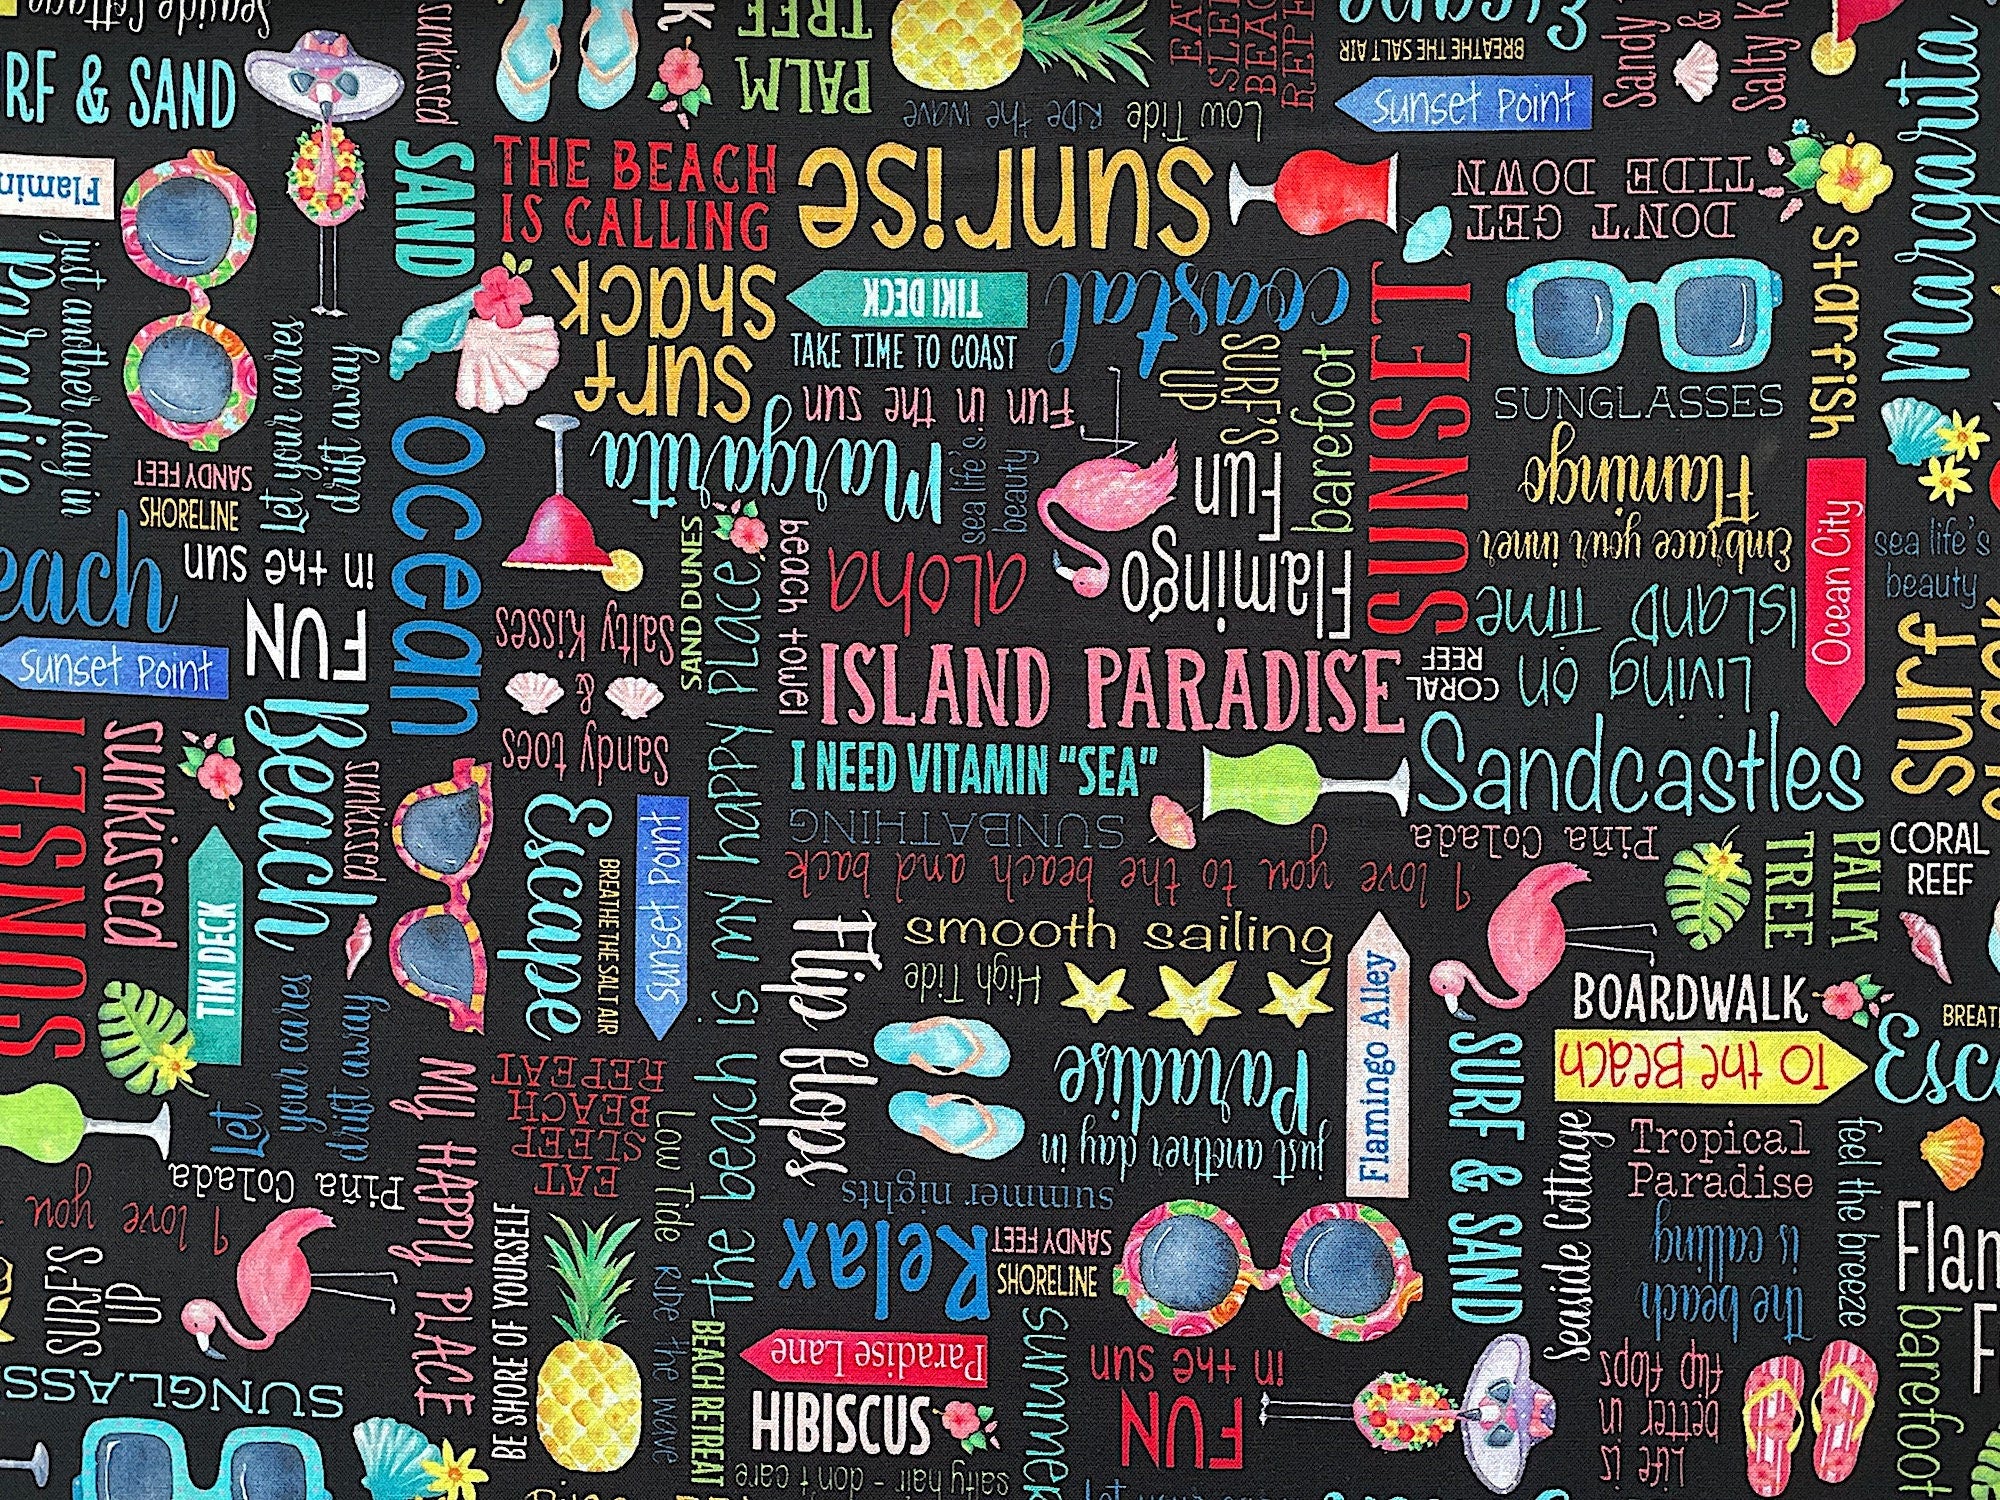 This fabric is part of the Fun In The sun collection. This black cotton fabric is covered with sunglasses, sea shells, palm tree leaves, pineapples, flamingo and more. There are also beach sayings such as sunbathing, barefooted, palm tree, living on island time, and more.